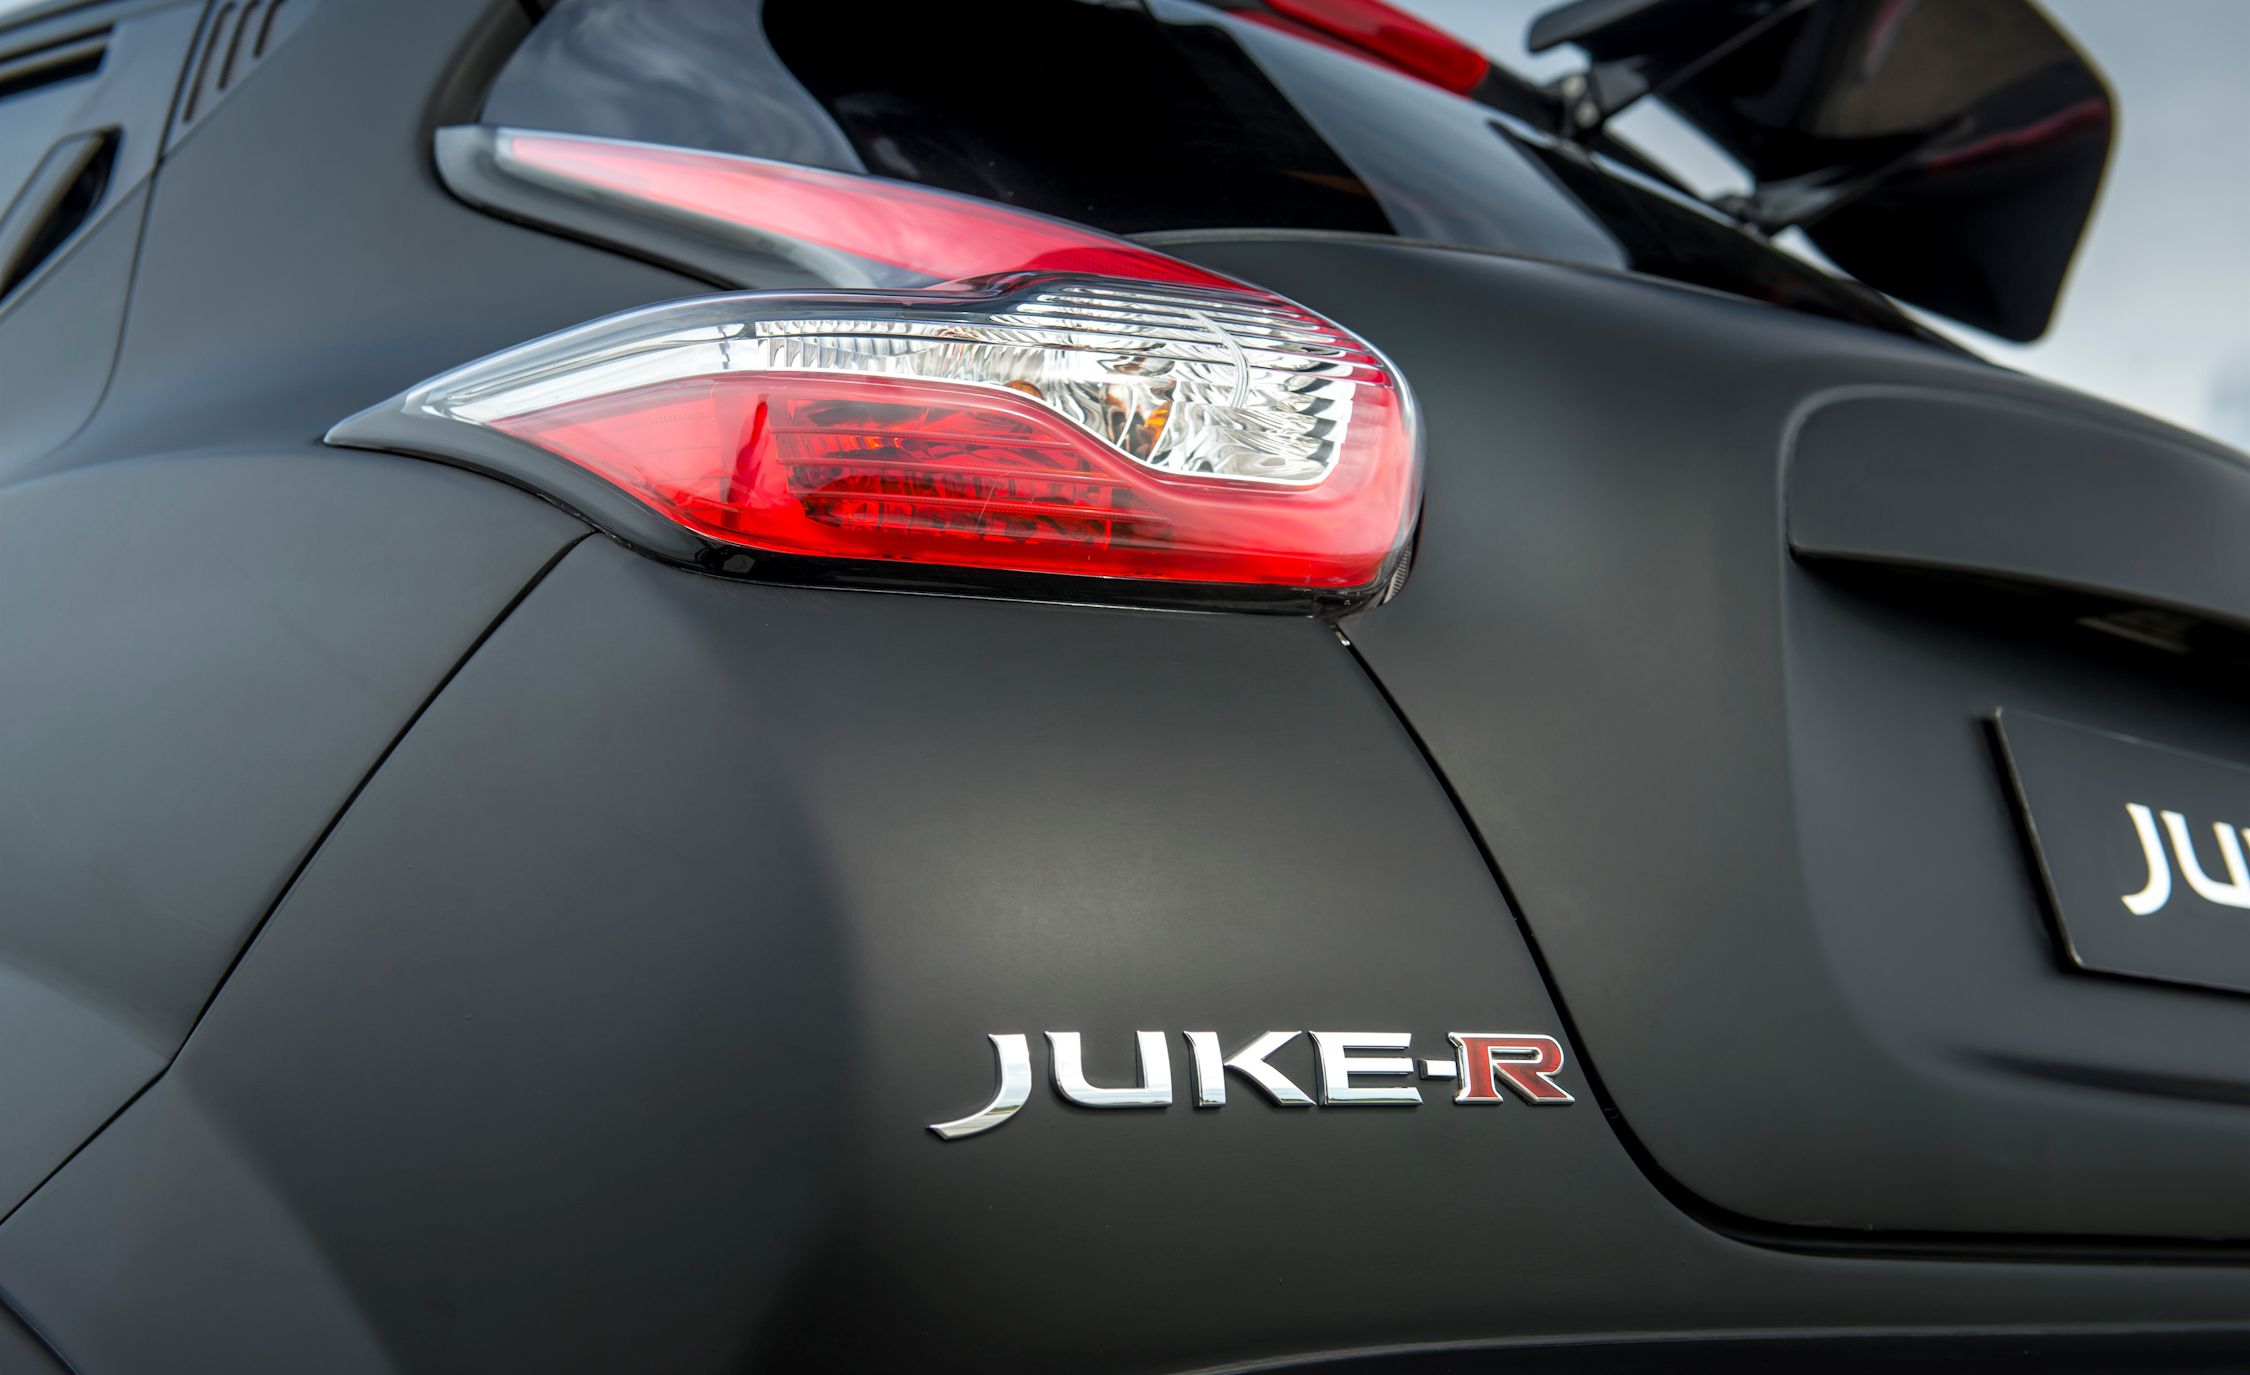 Nissan reworks the Juke and toughens up the X-Trail for 2015